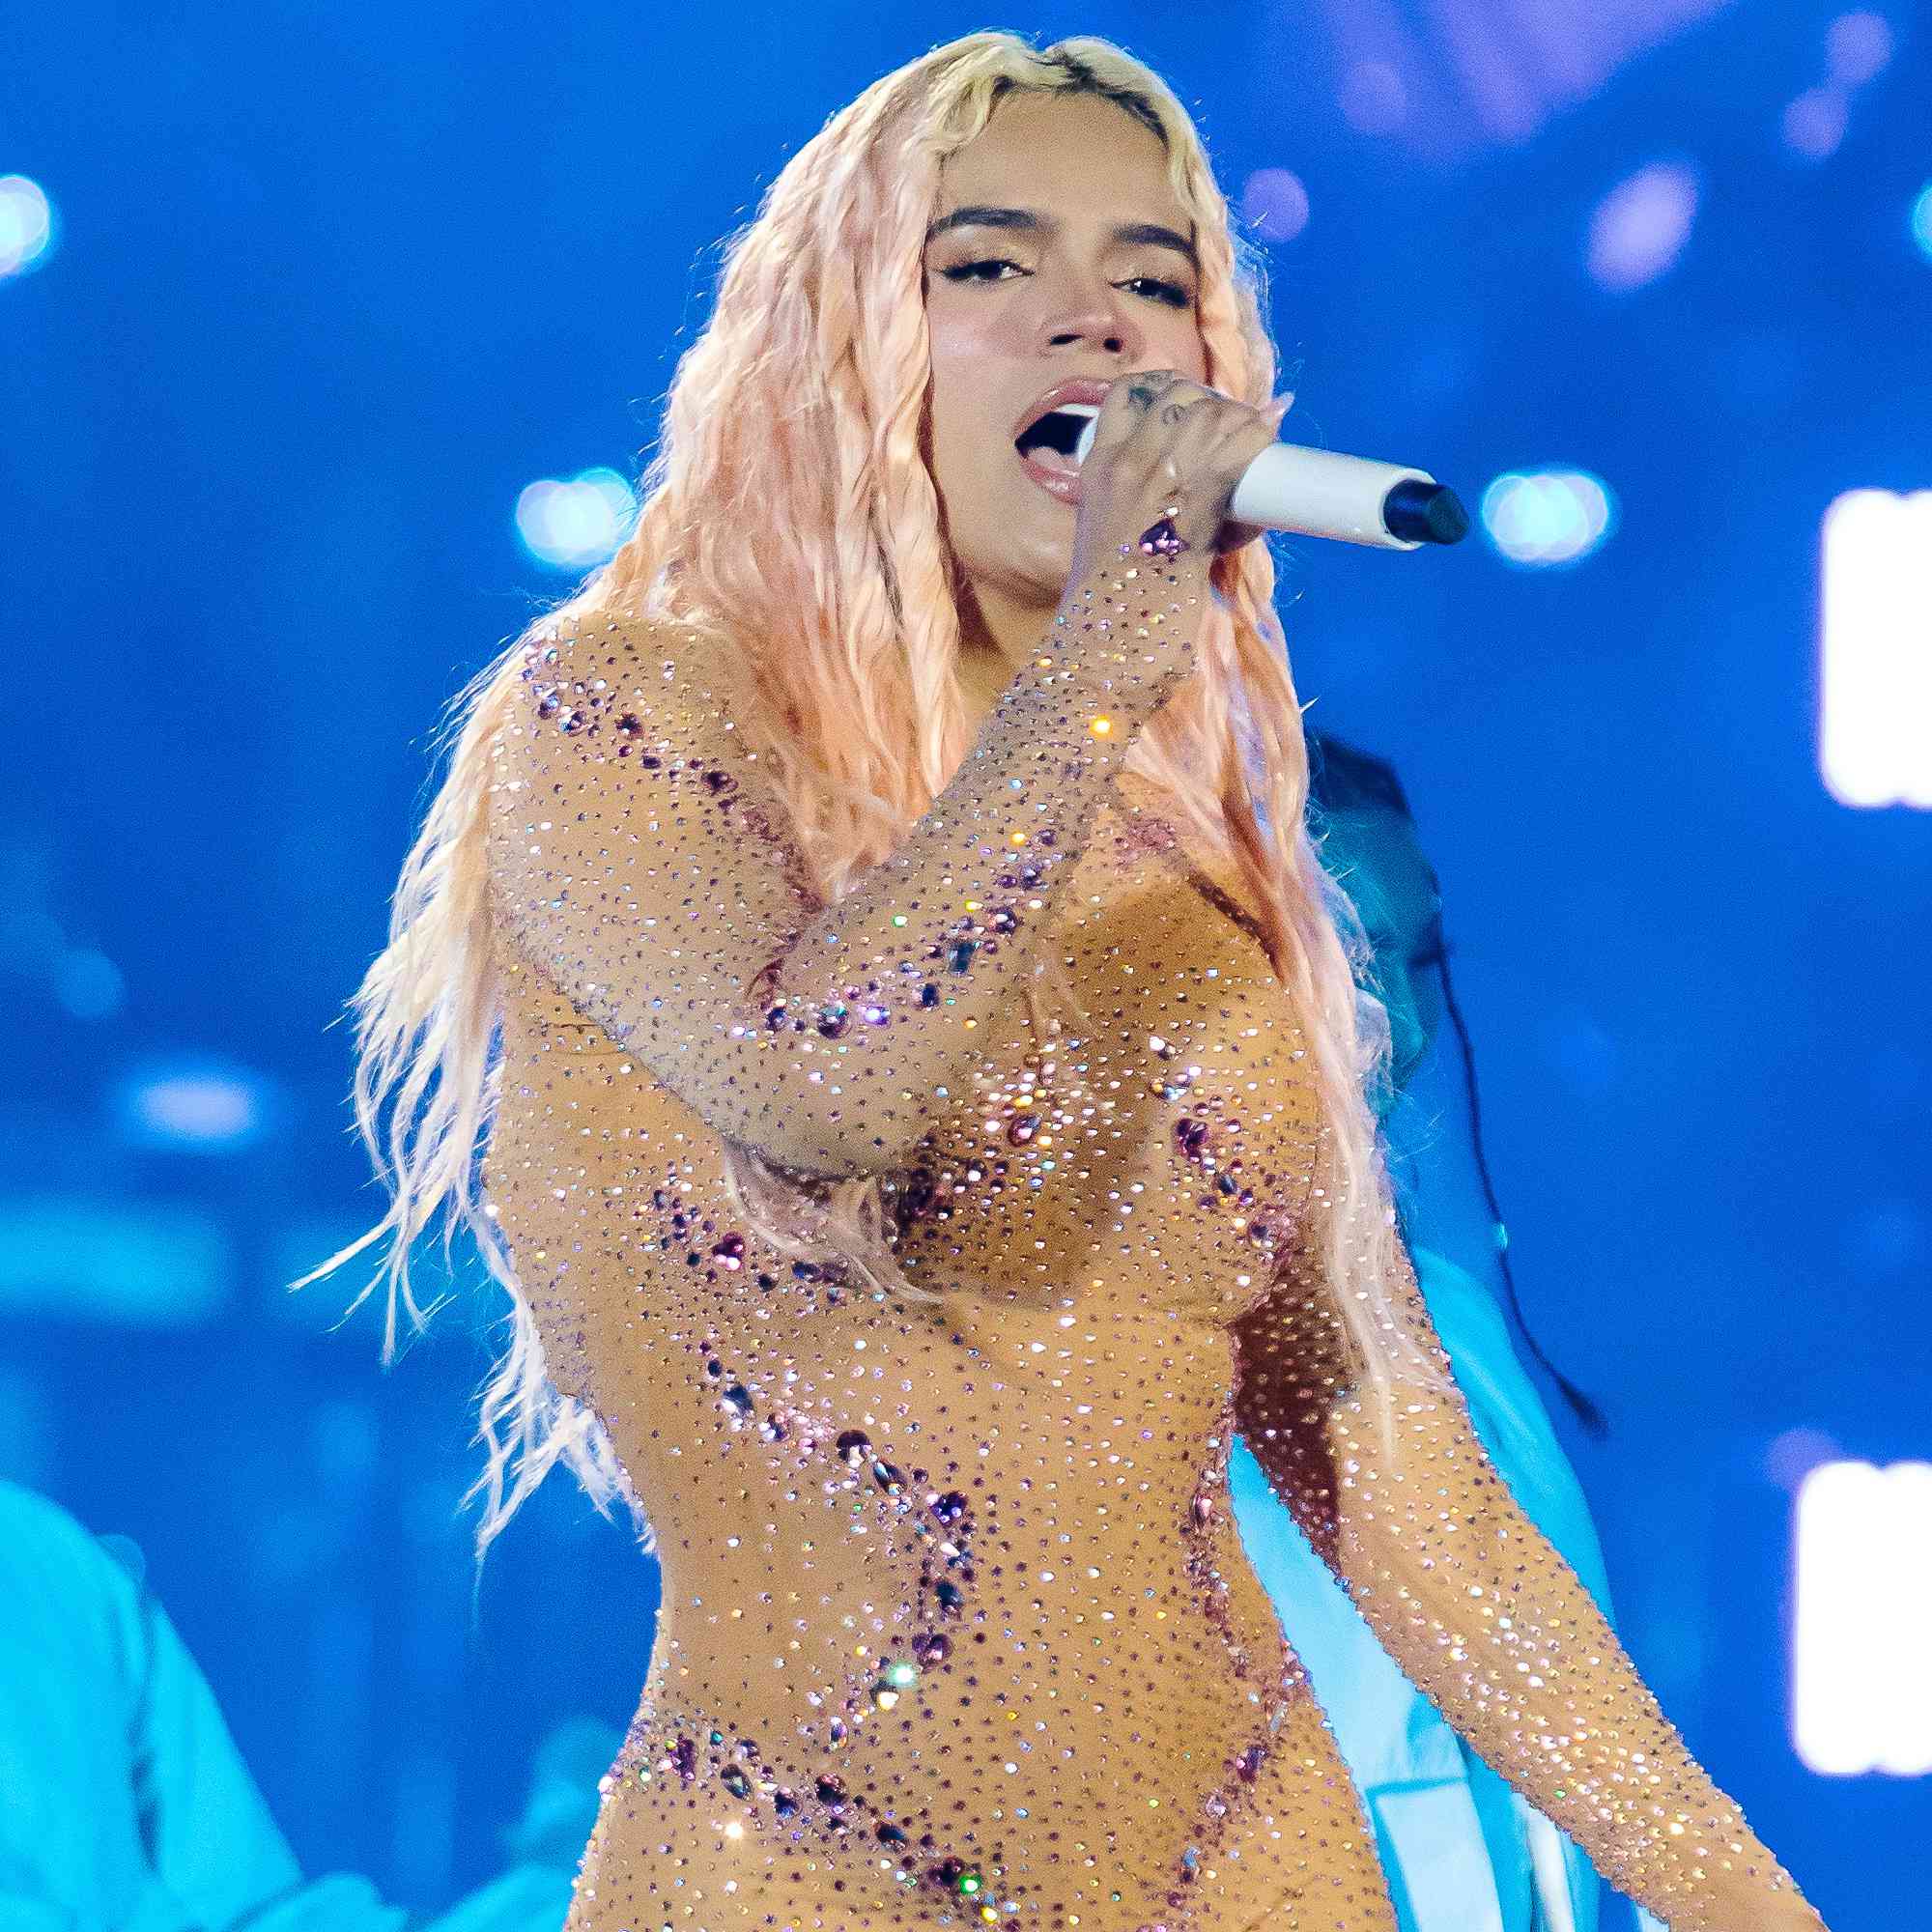  Karol G performs during a concert at Sultanes stadium